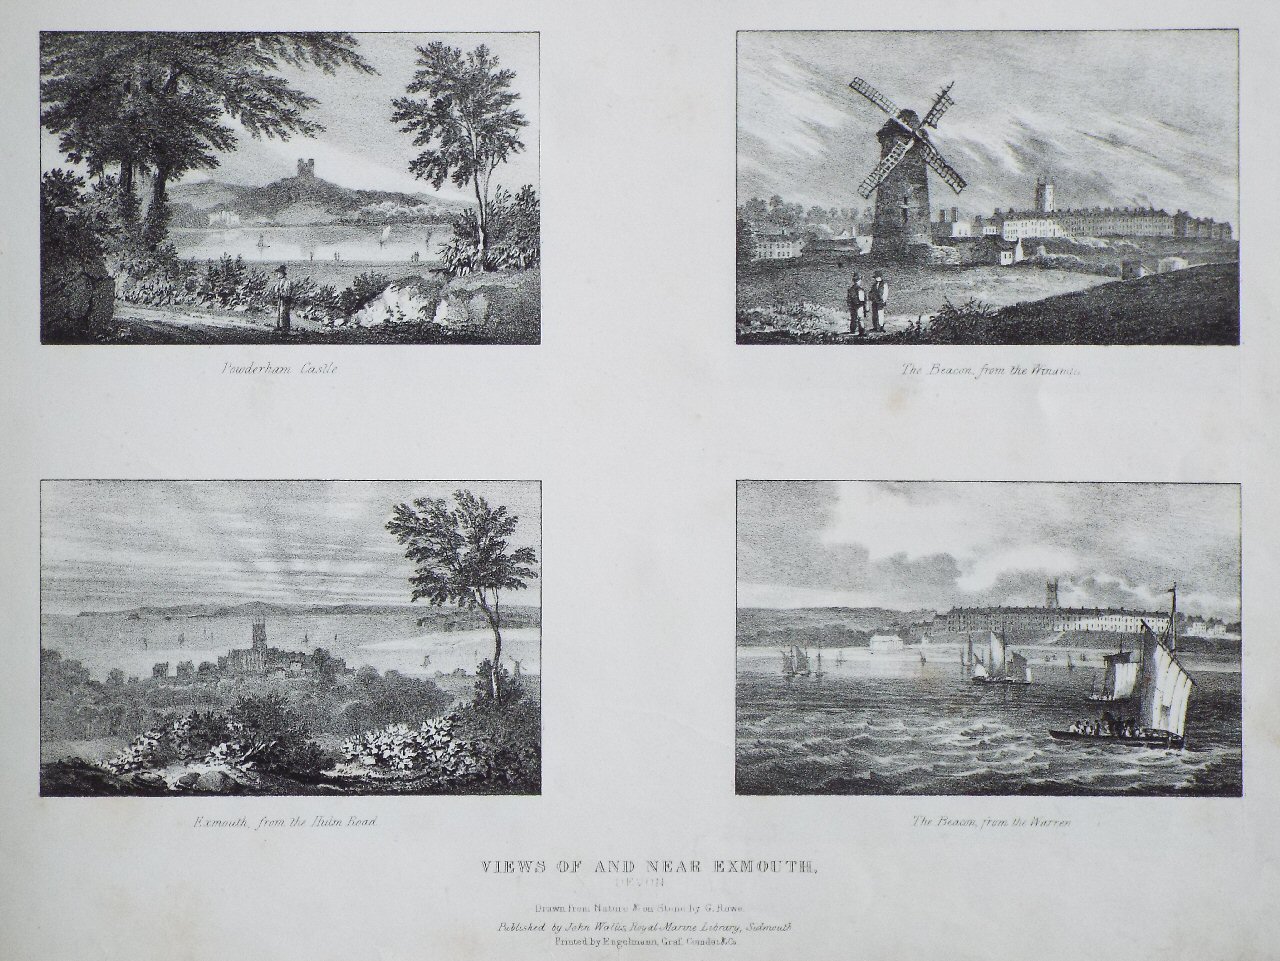 Lithograph - Views of and near Exmouth, Devon. Powderham Castle, The Beacon from the Windmill, Exmouth from the Hulm Road, The Beacon from the Warren - Rowe